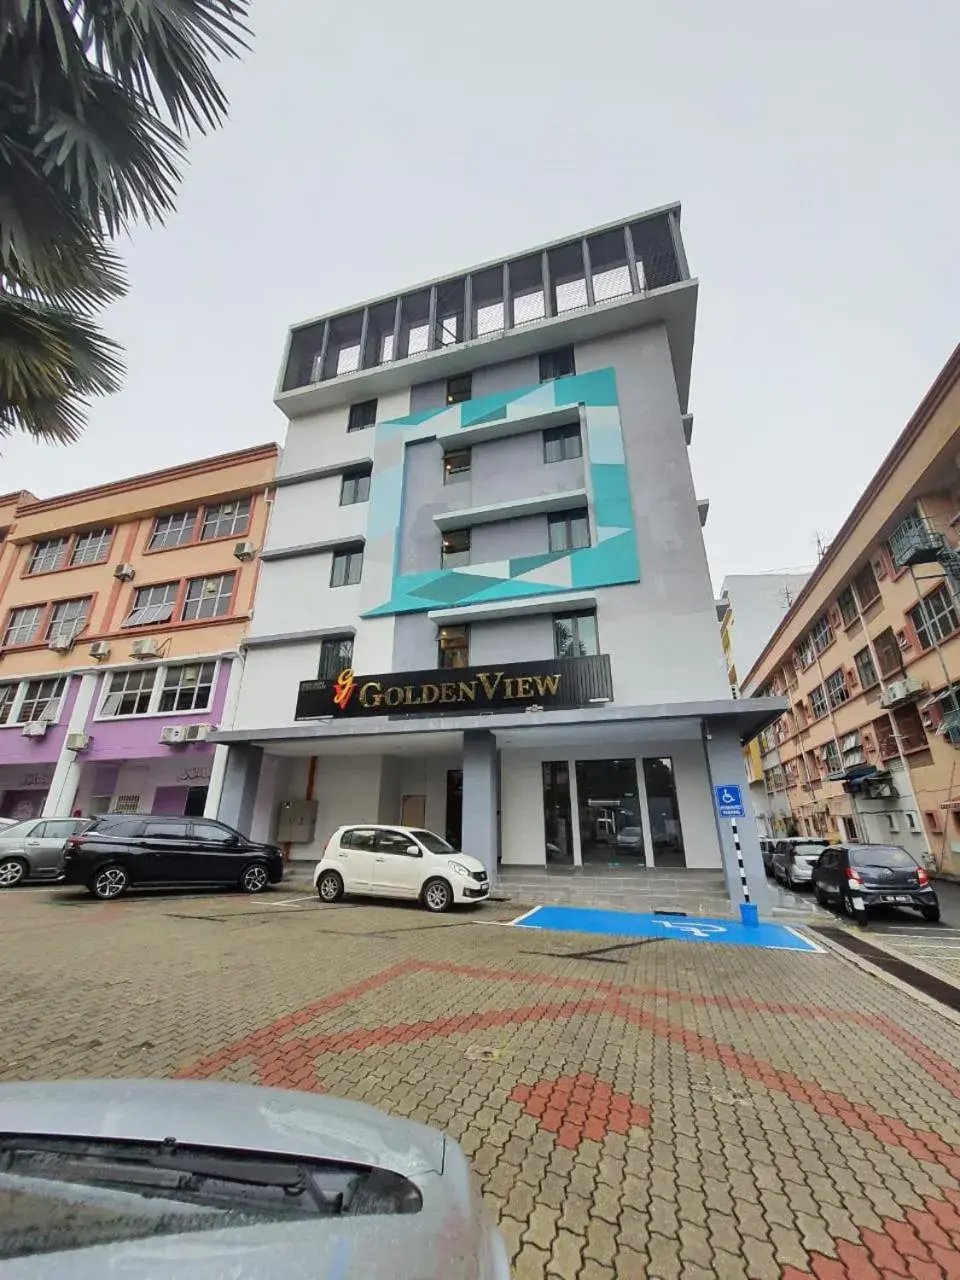 Property Building in Hotel Golden View Nilai